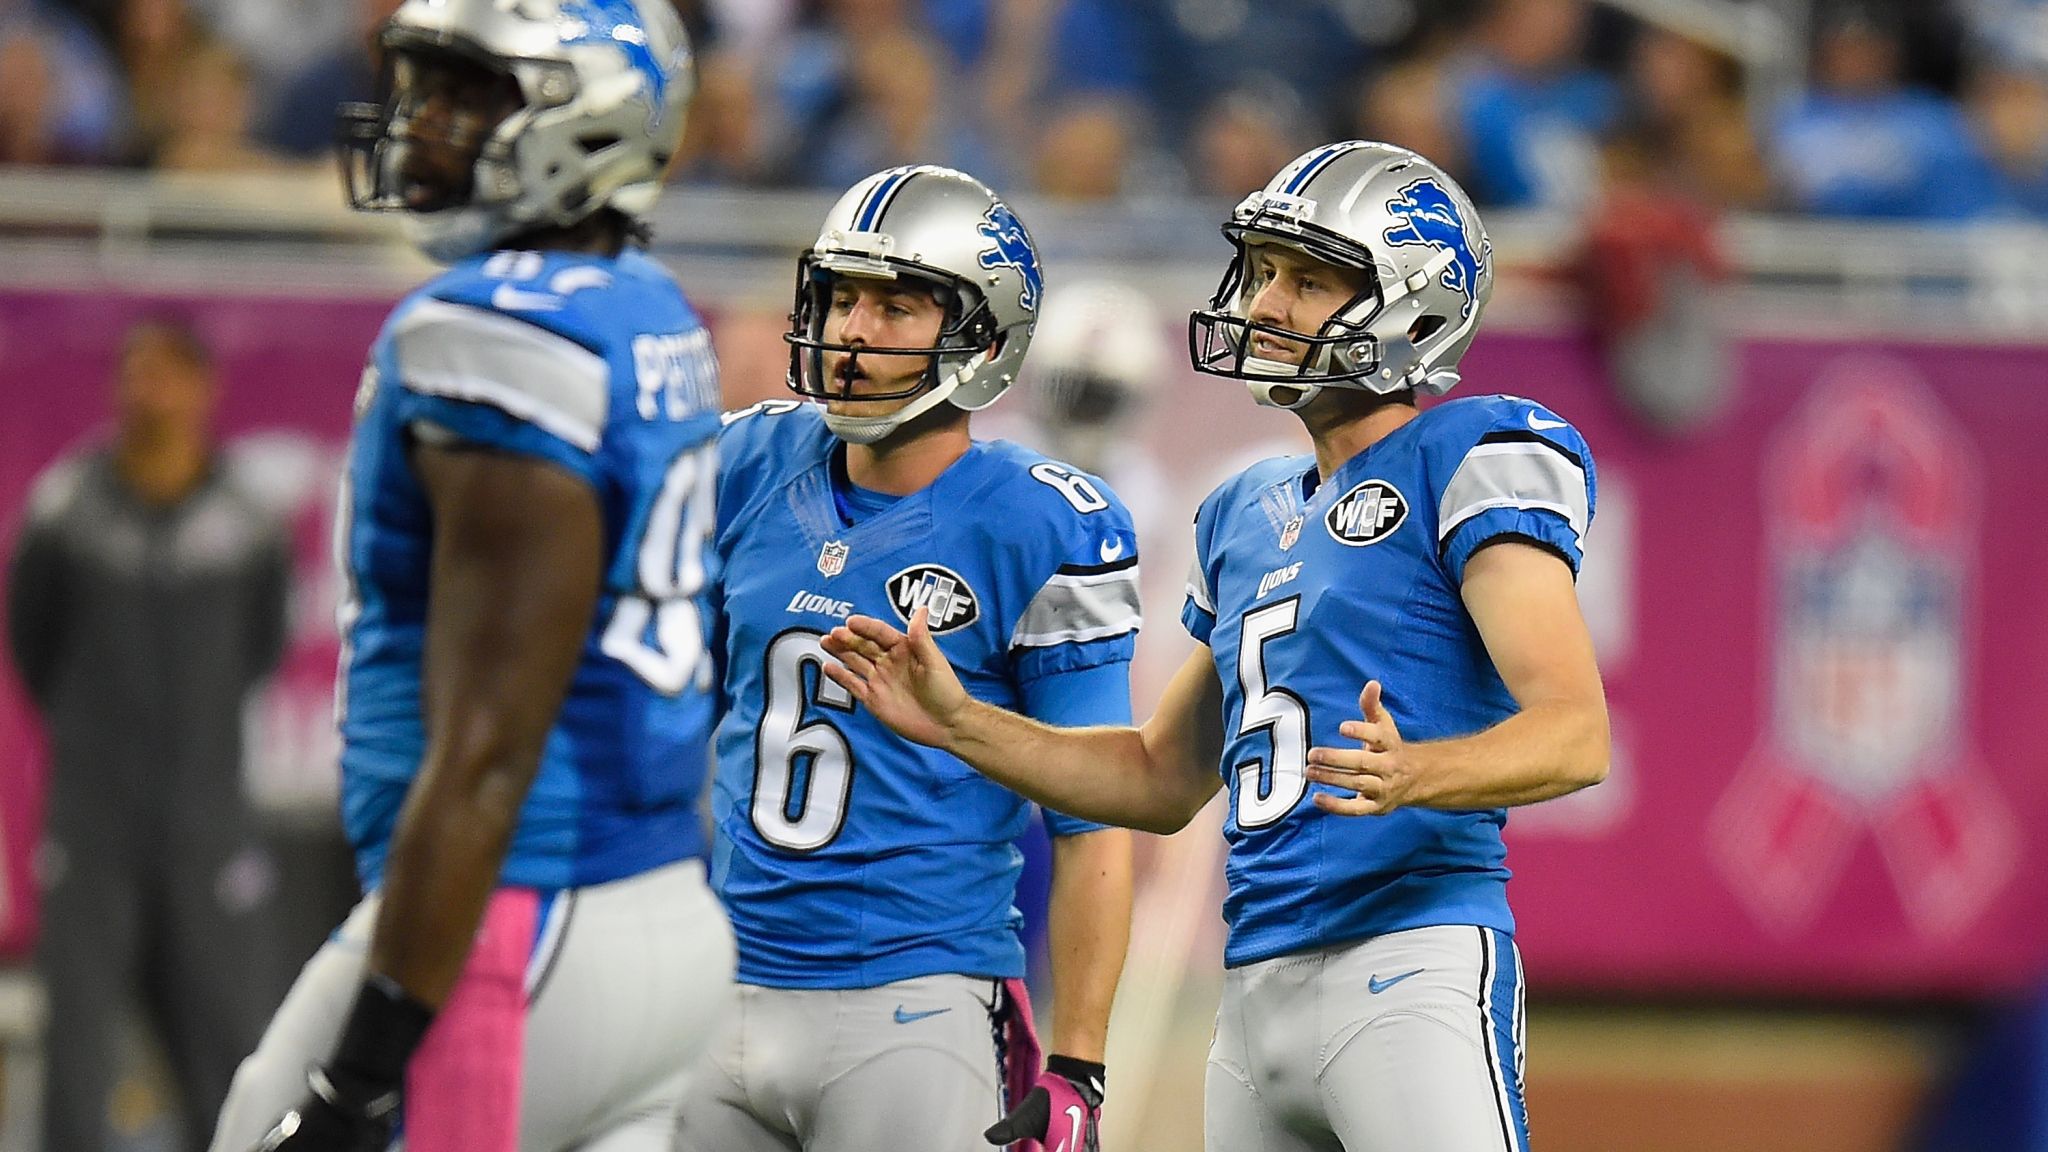 WCF' on Detroit Lions jersey: What does it stand for?